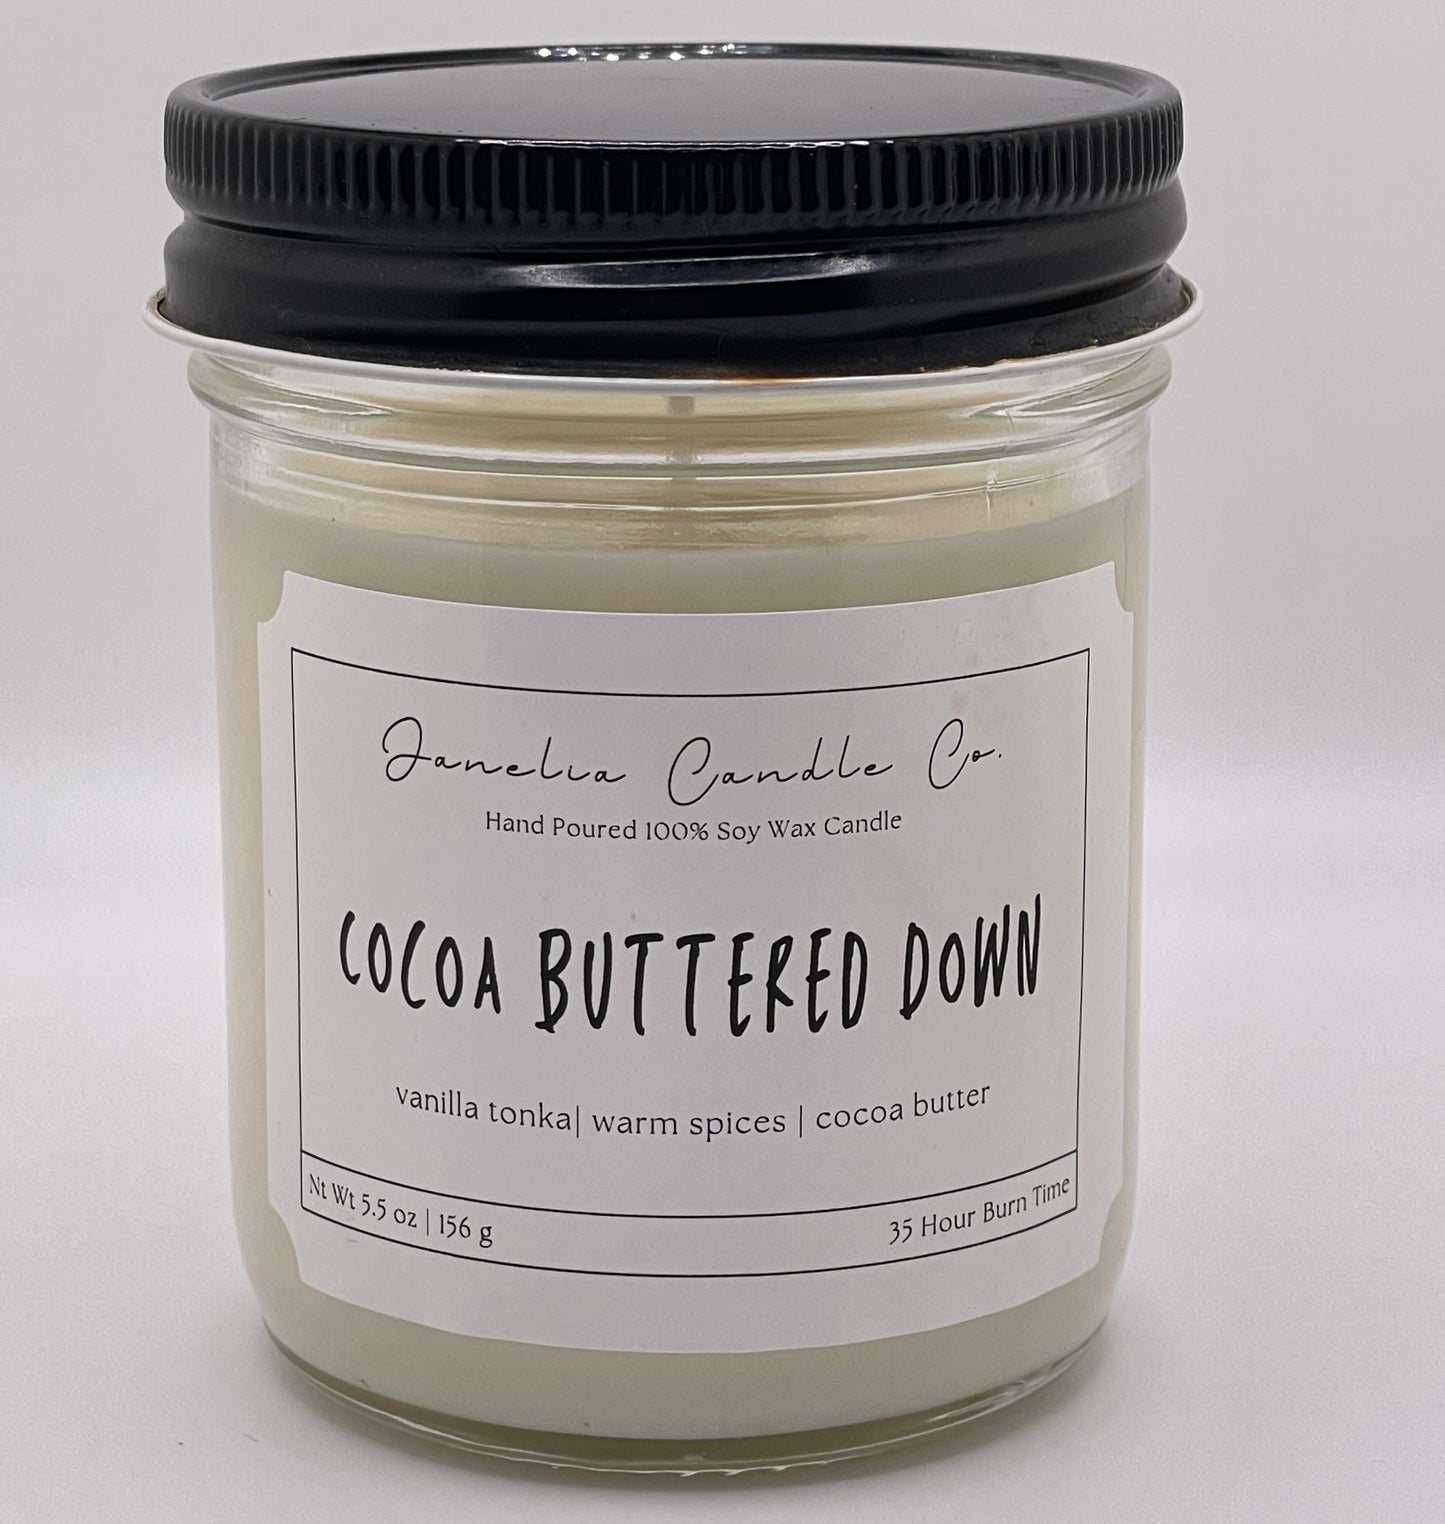 Cocoa Buttered DOWN